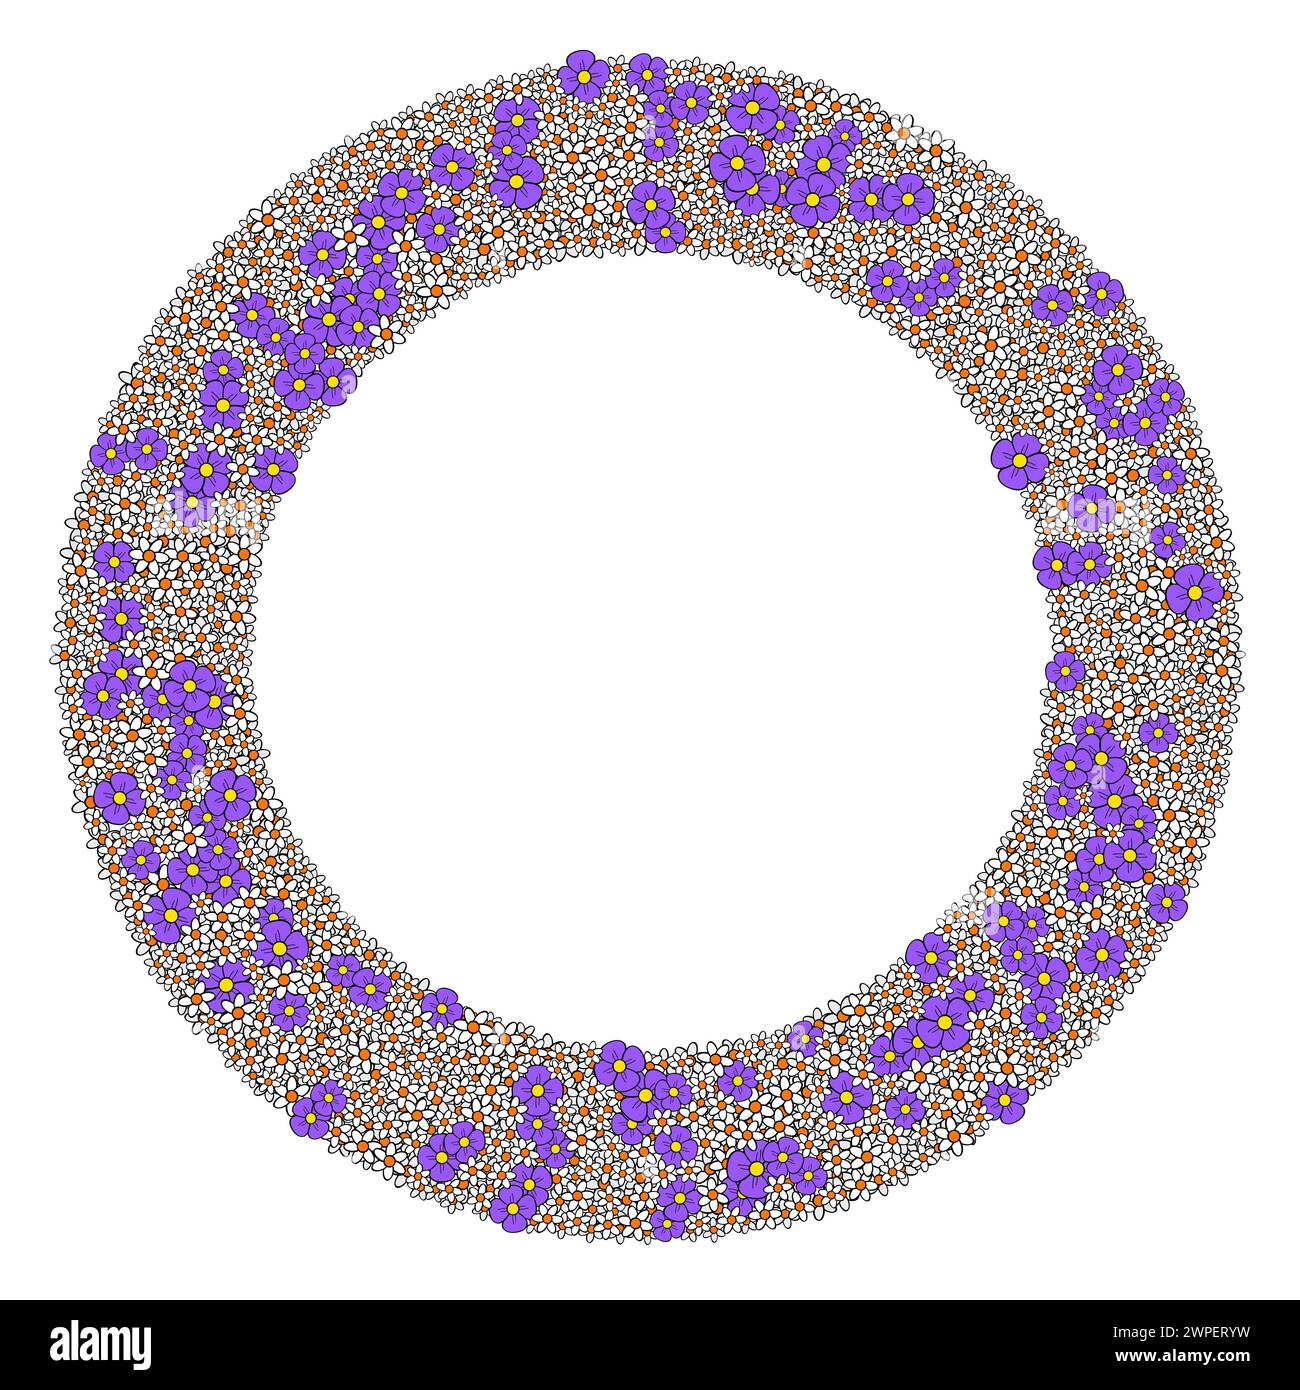 Floral wreath made of numerous tiny white and purple flowers. Circle frame with a lot of randomly arranged blossoms. Isolated illustration. Stock Photo